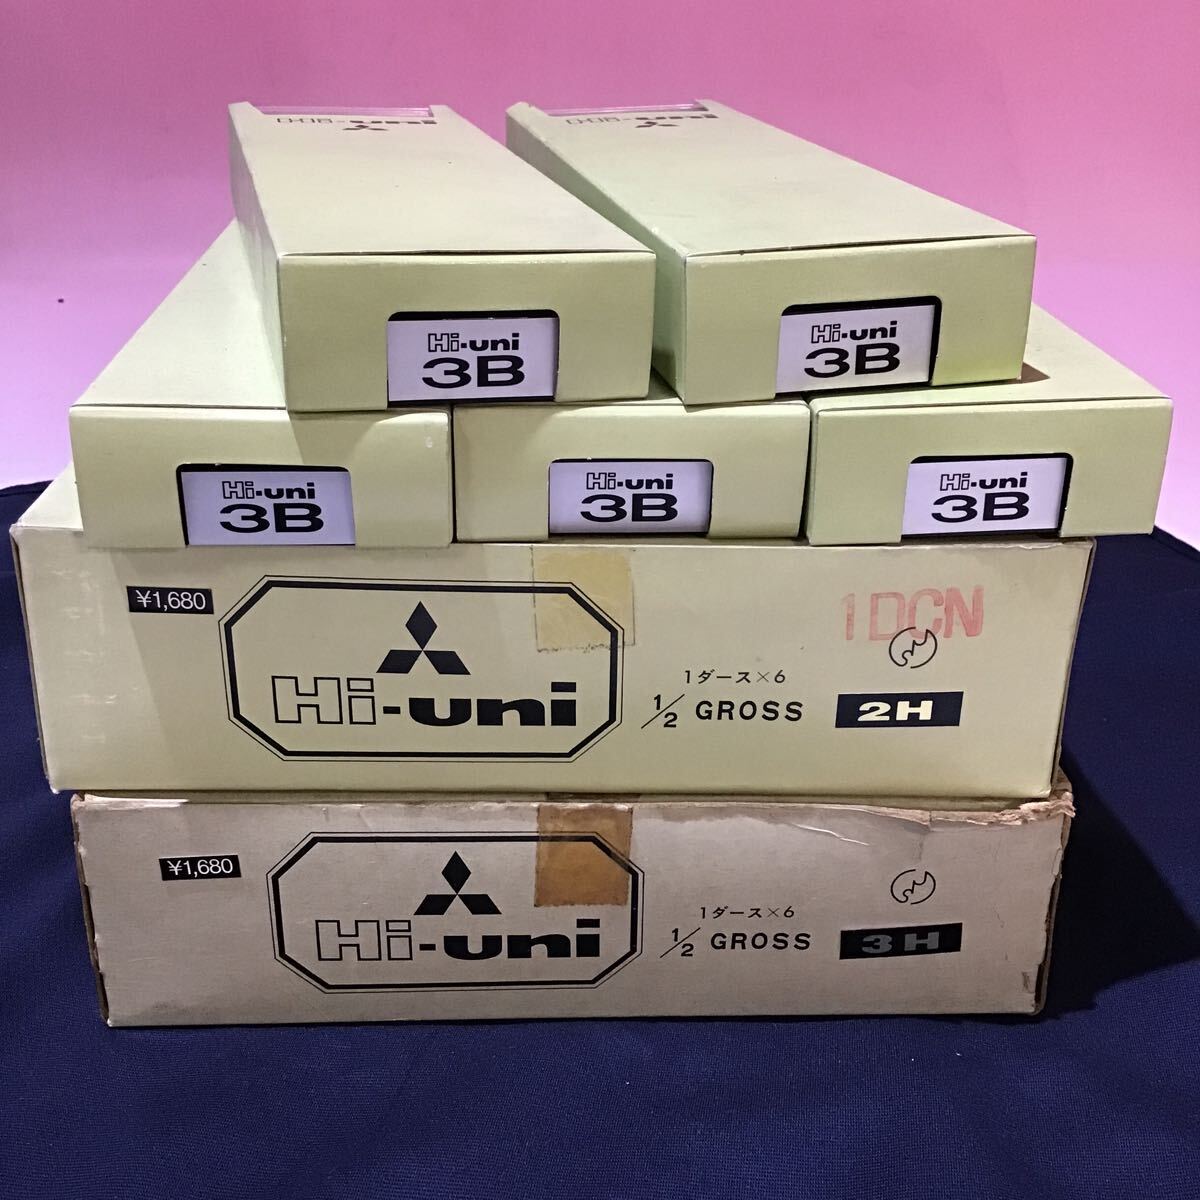 4032797 new goods records out of production Mitsubishi Uni Hi uni pra in the case 17 dozen 204ps.@ unopened Showa Retro that time thing together 